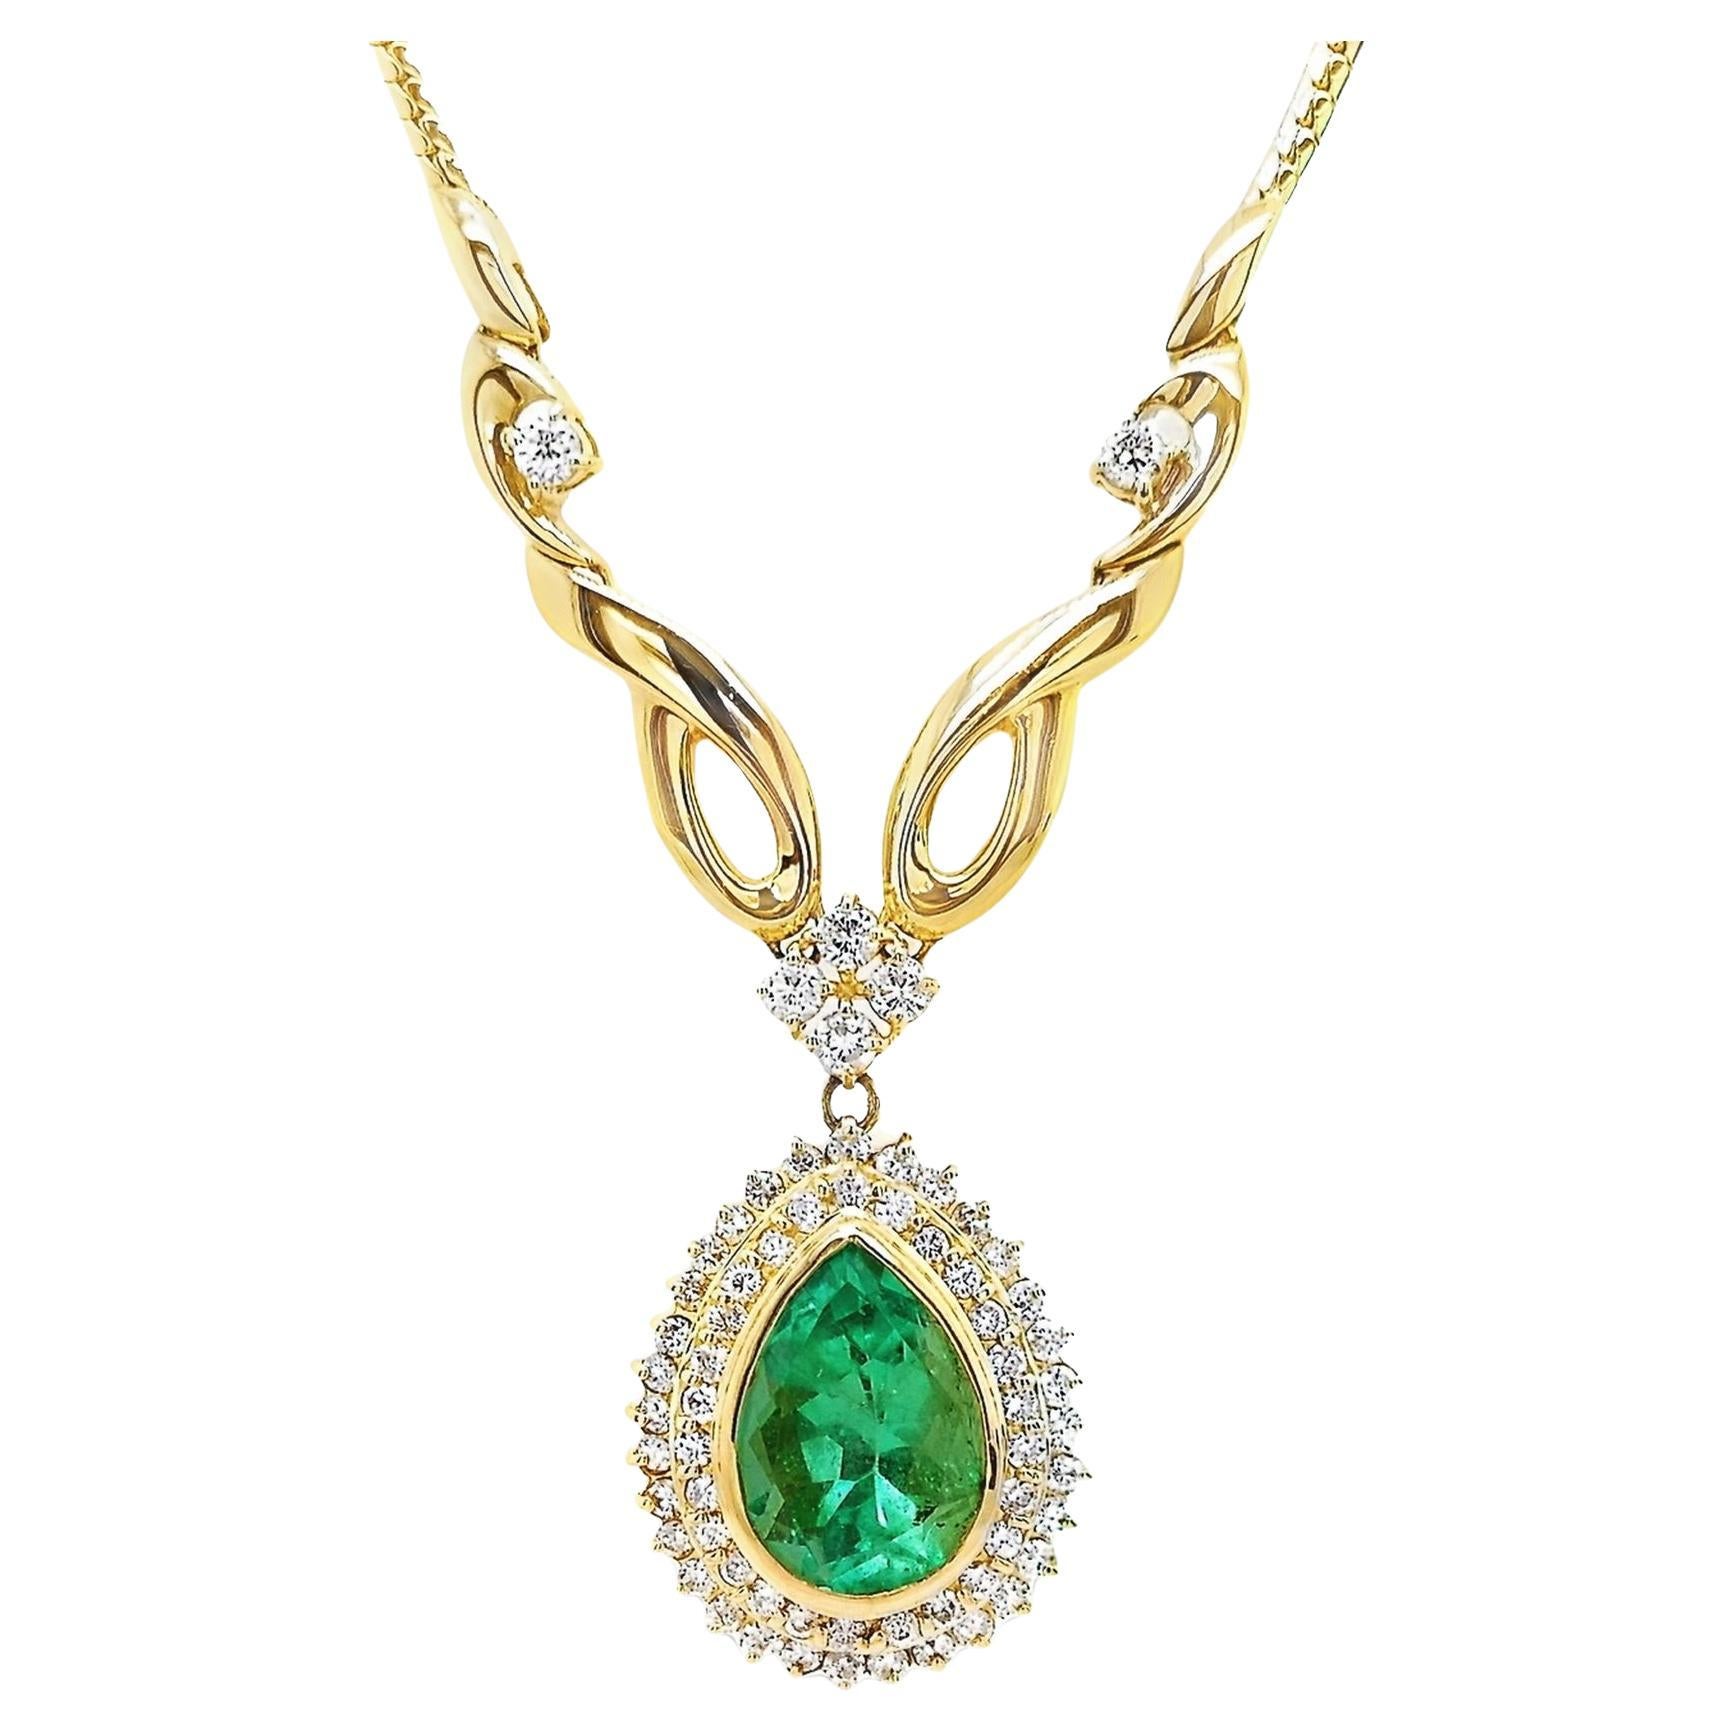 IGI Certified 5.14ct Colombia Emerald 1.46ct Diamonds 18K Yellow Gold Necklace